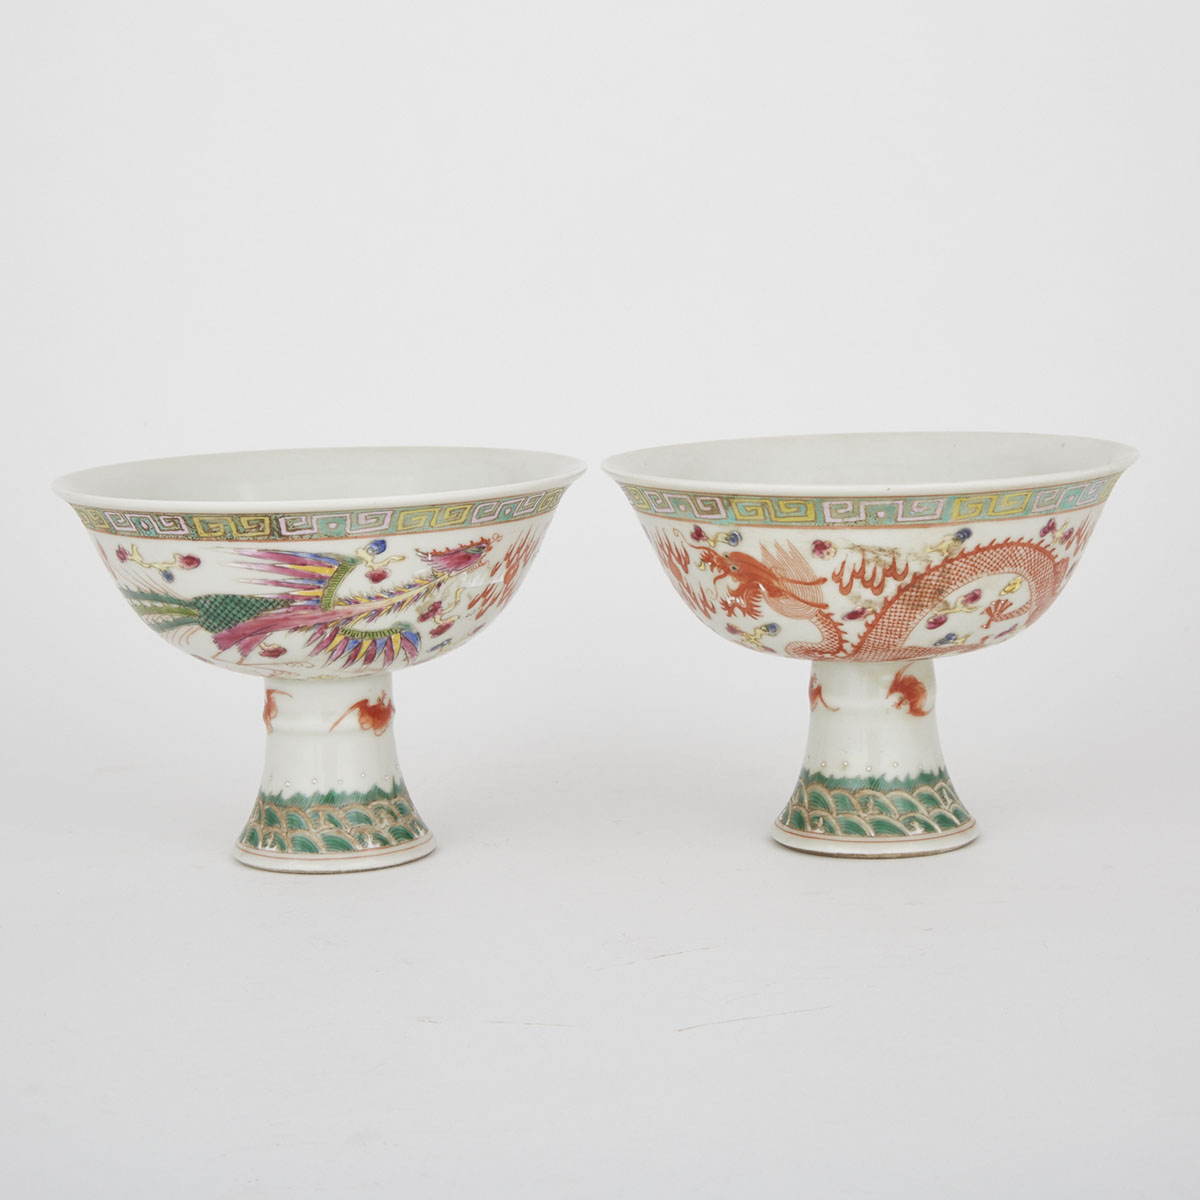 A Pair of Guangxu High-Footed Bowls